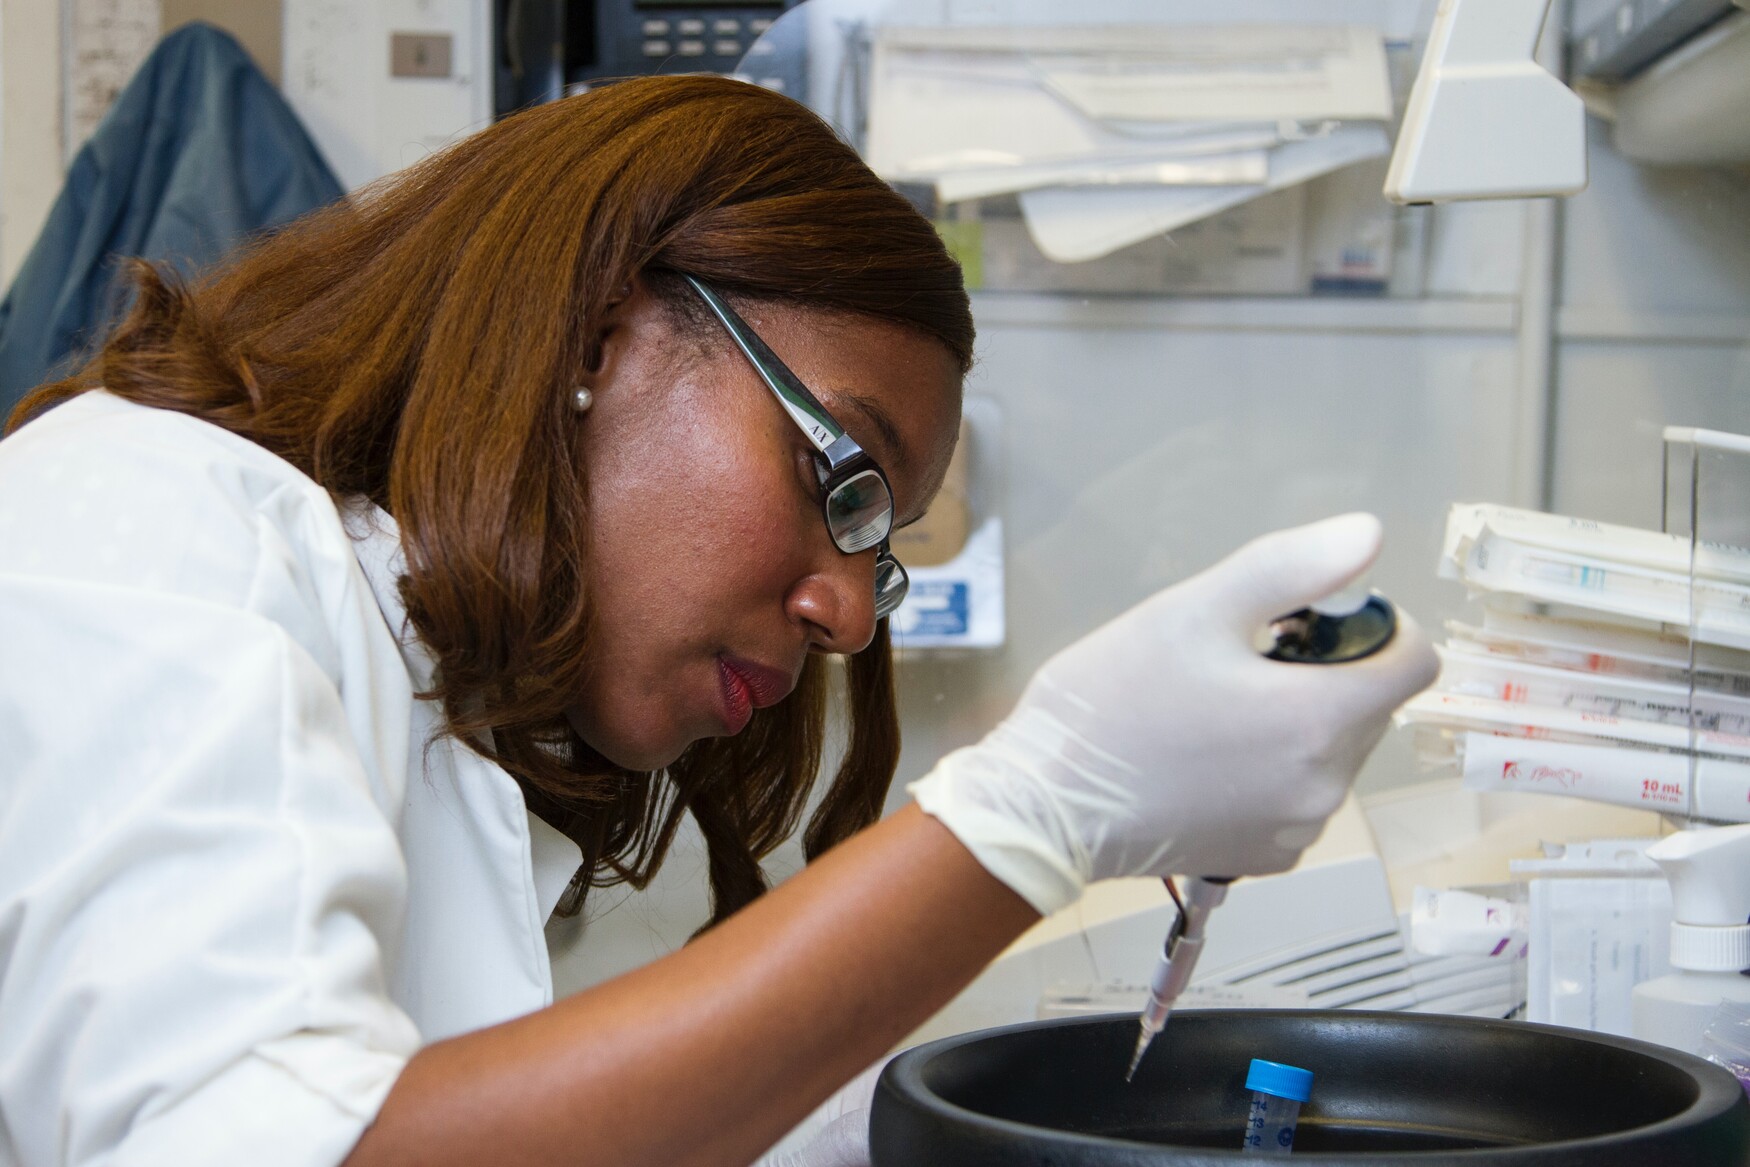 A researcher uses a pipette.